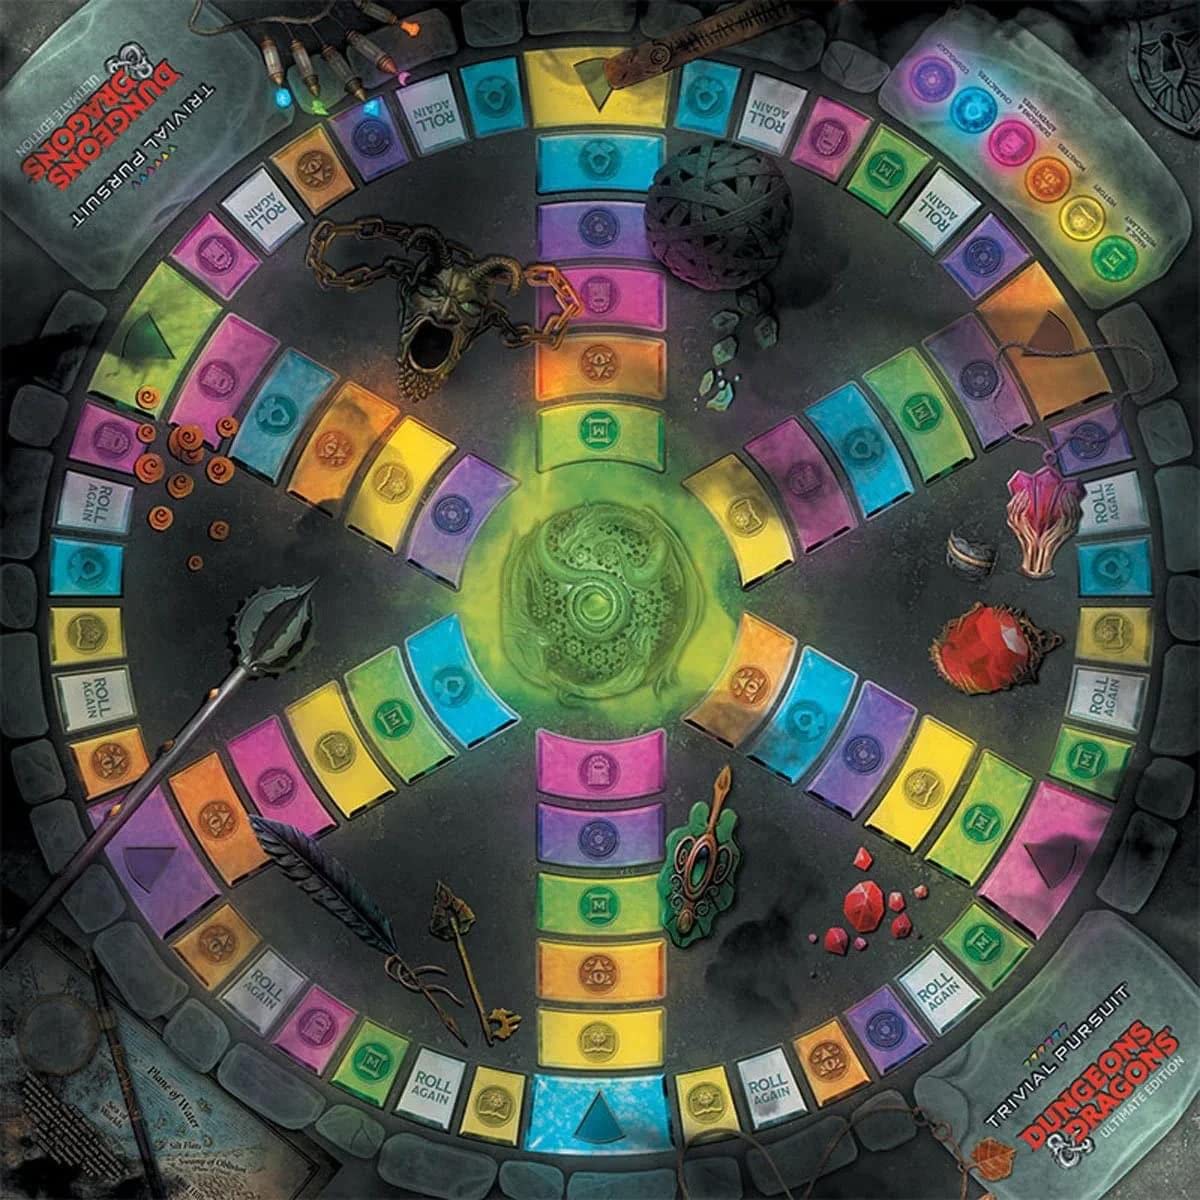 Trivial Pursuit: Dungeons & Dragons Ultimate Edition | Collectible Trivia Board Game Featuring 6 Monster Movers and 1800 Questions Across 6 Categories | Officially-Licensed D&D Game & Merchandise